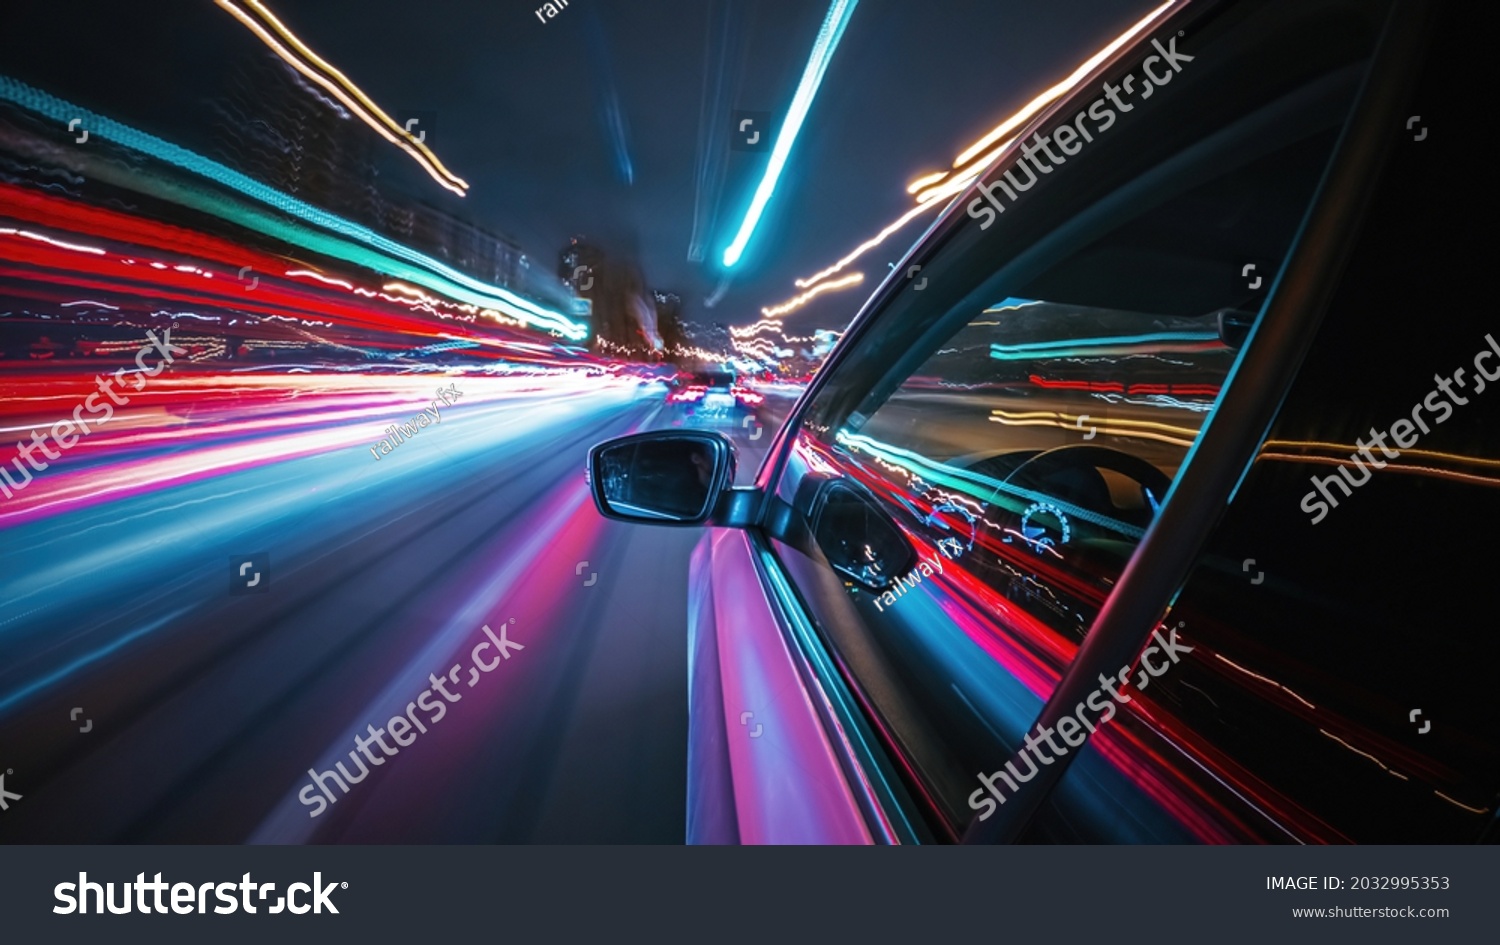 Motion time of a speedy night drive in a big city ending in the underground car parking. Side view from the car window to the road with light trails from vehicles and street lights. #2032995353